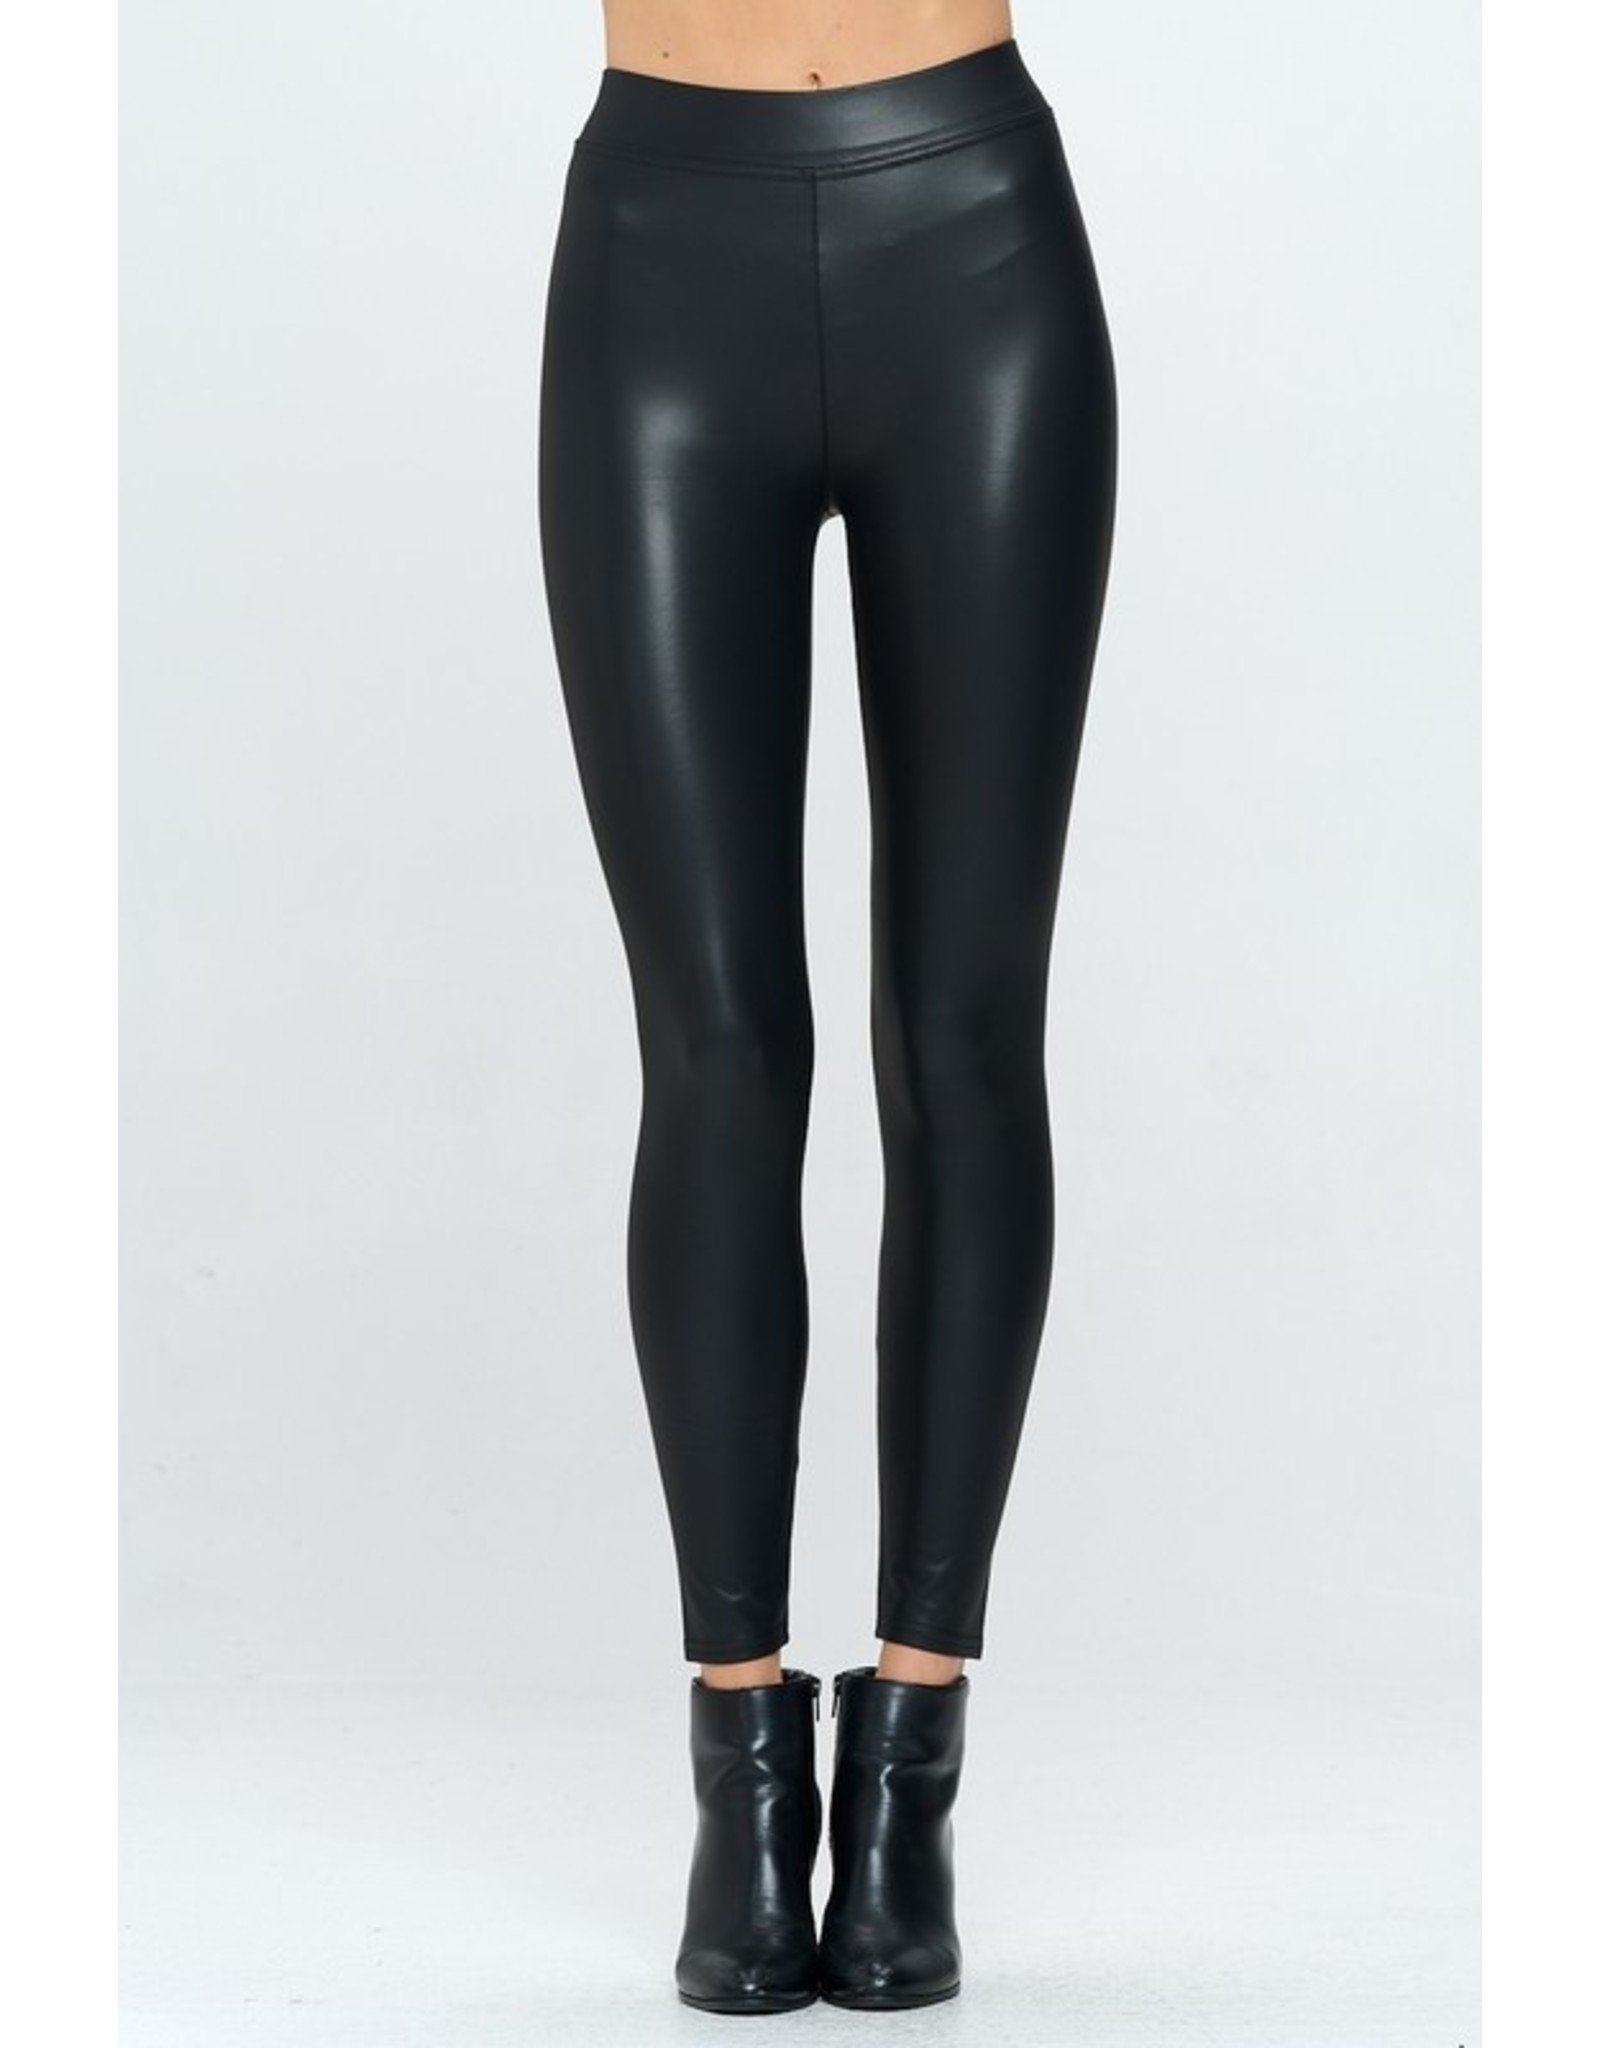 Price: 15306.00 Rs RUFIYO Faux Leather Leggings for Women High Waisted  Leather